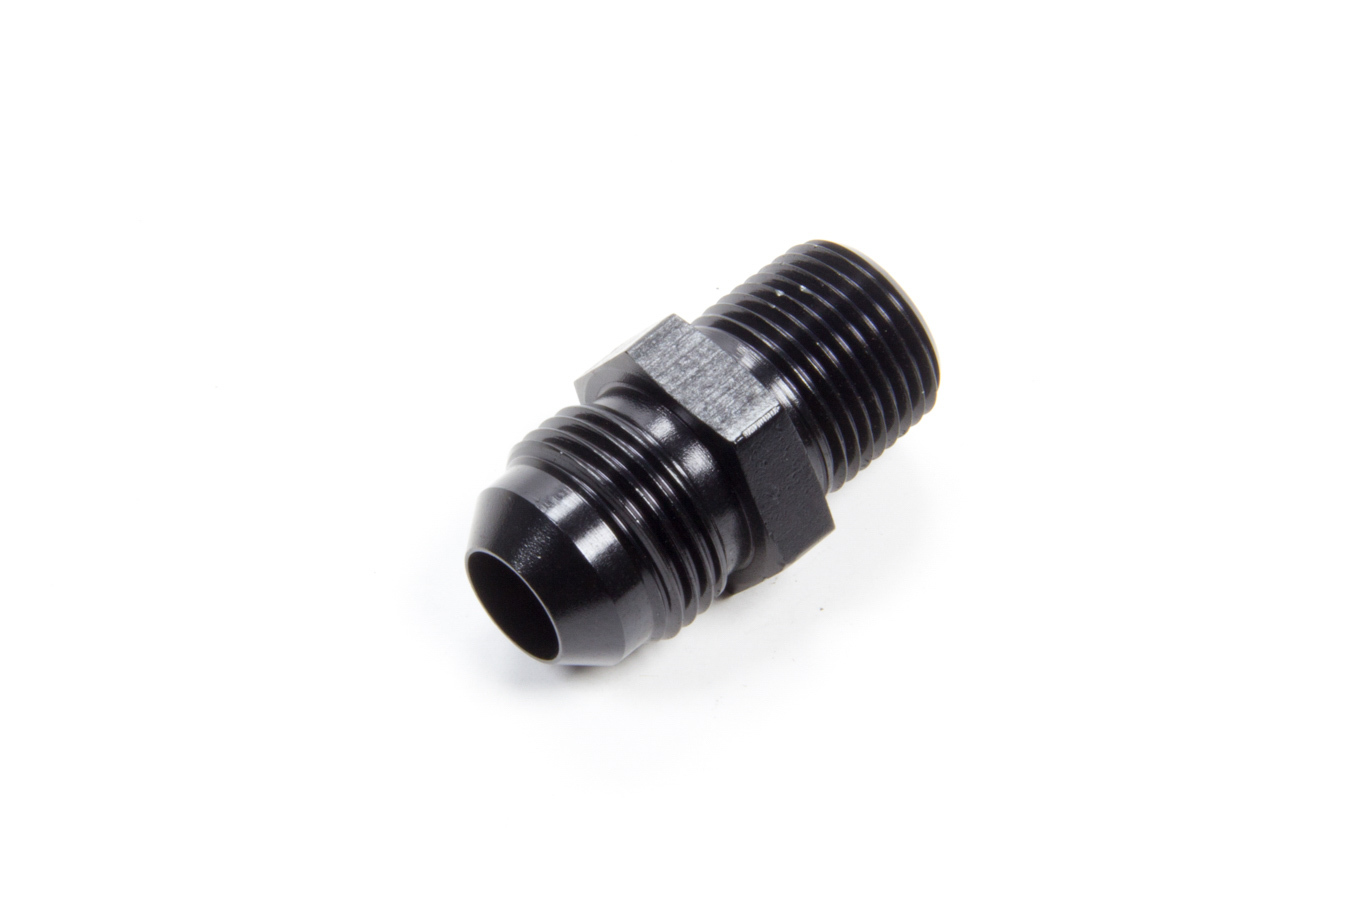 Aeroquip FCM5007 Fitting, Adapter, Straight, 8 AN Male to 3/8 in NPT Male, Aluminum, Black Anodized, Each